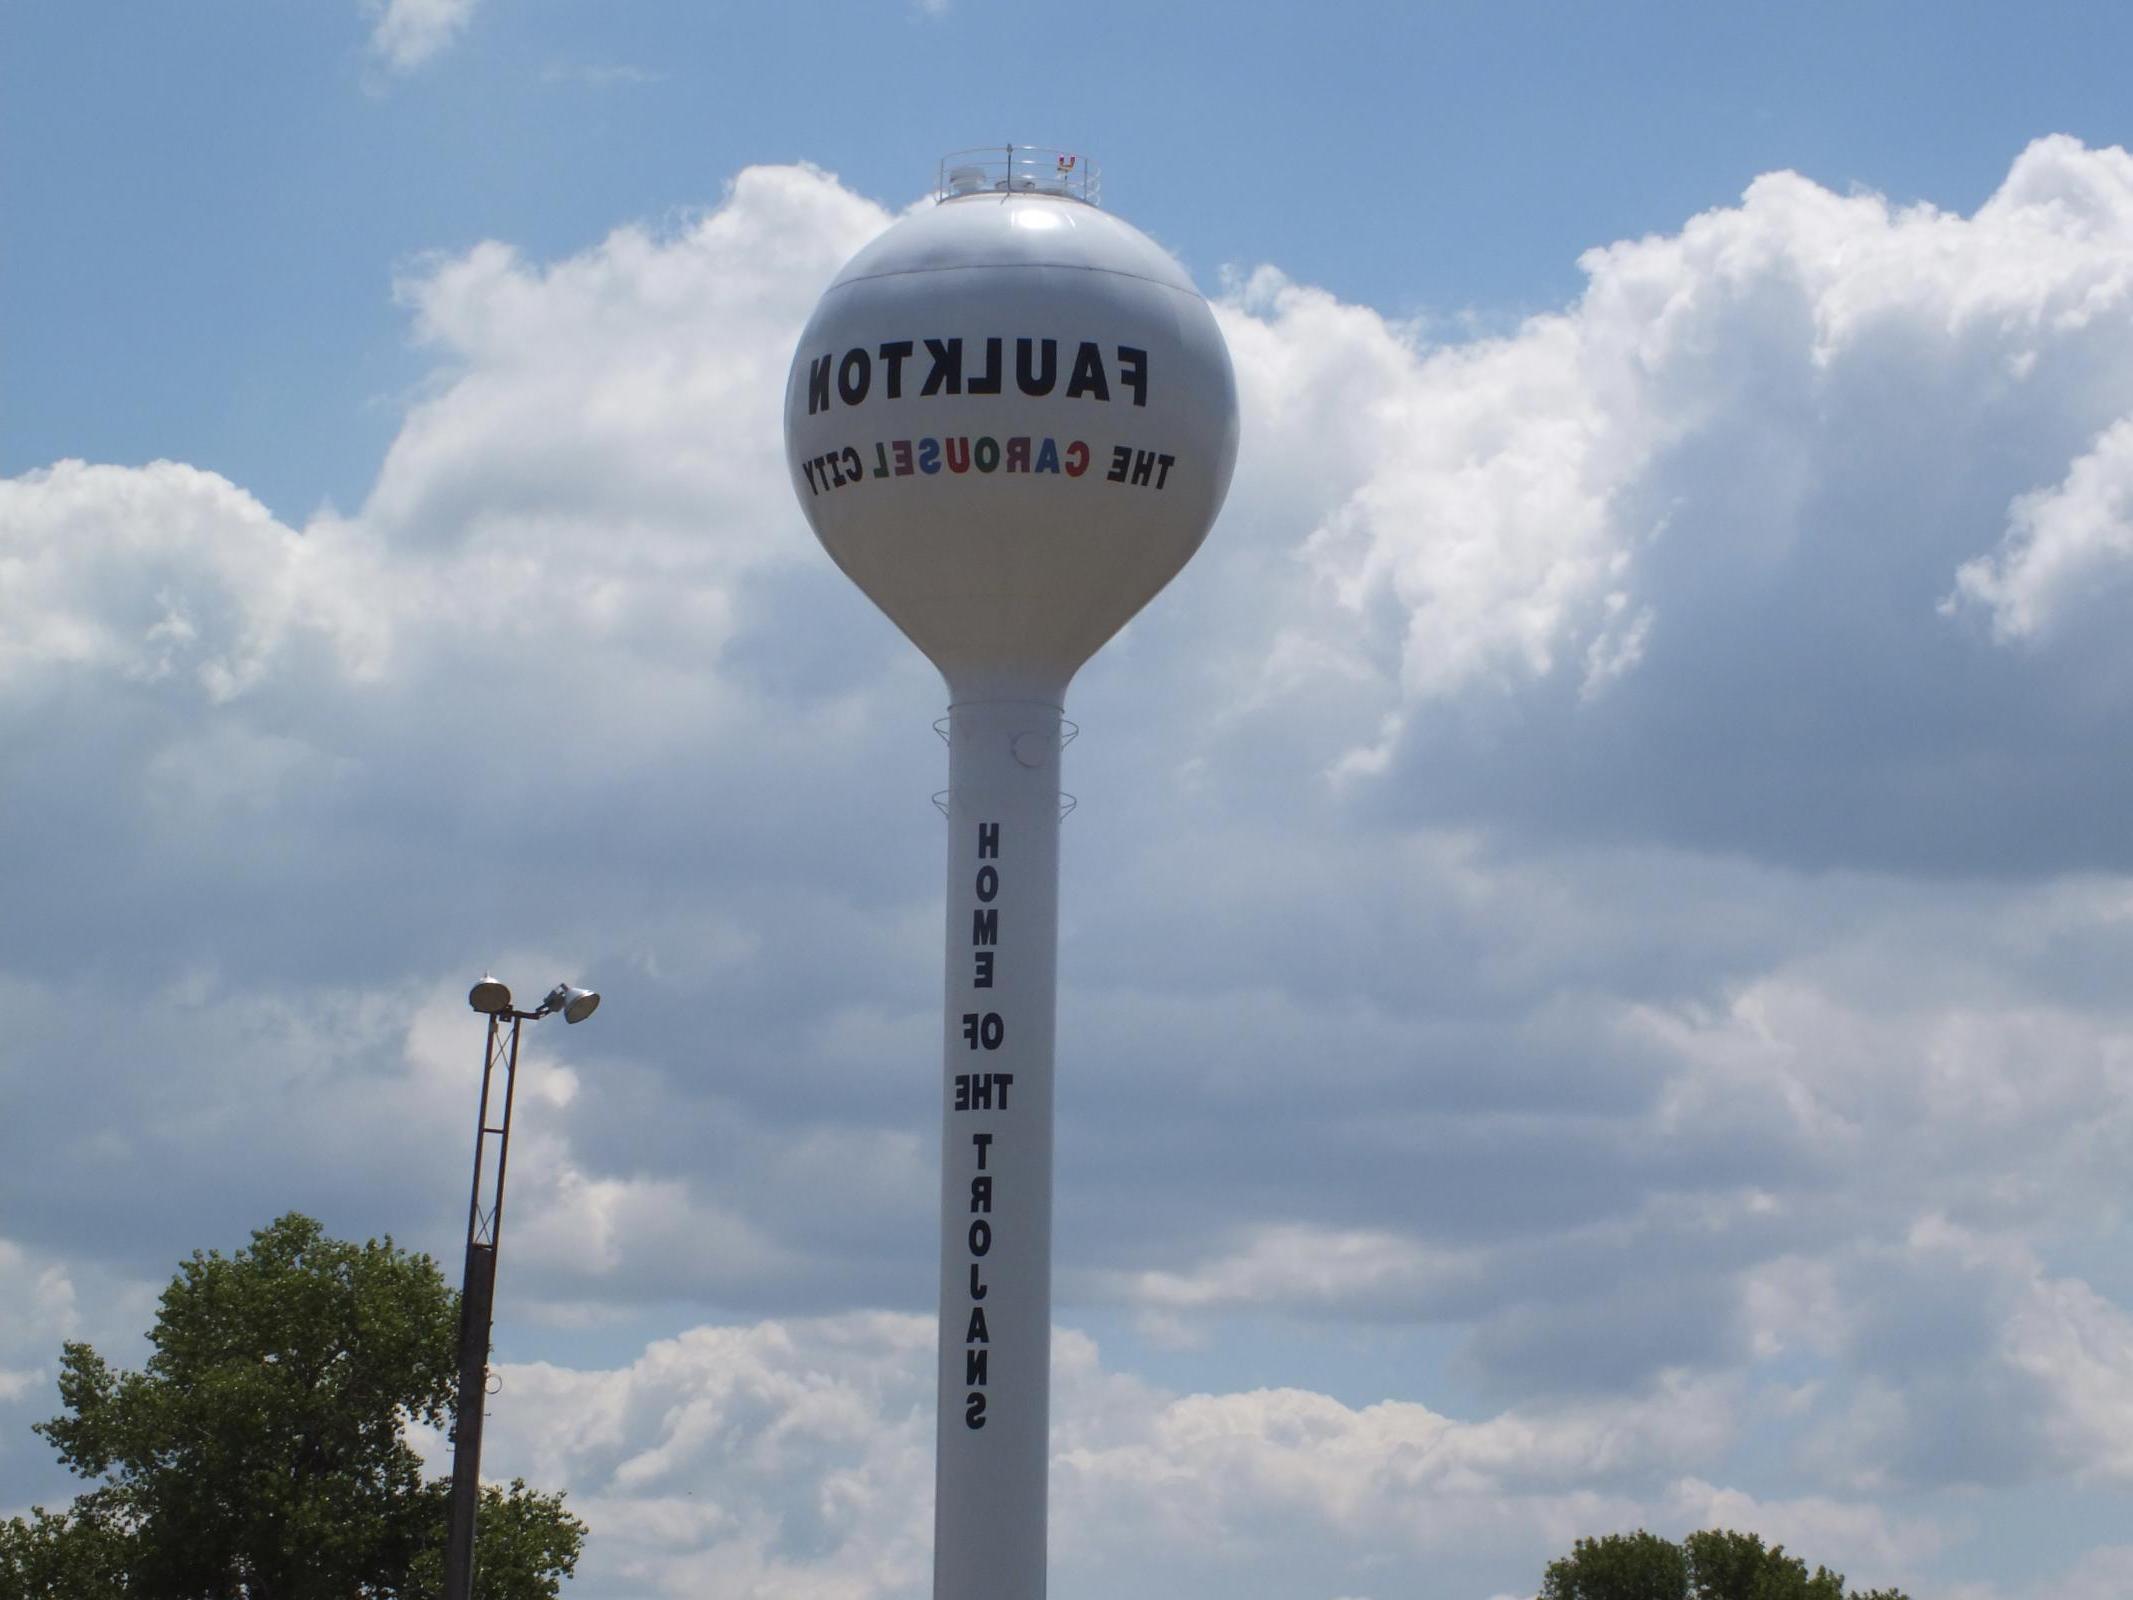 City Water Tower's image